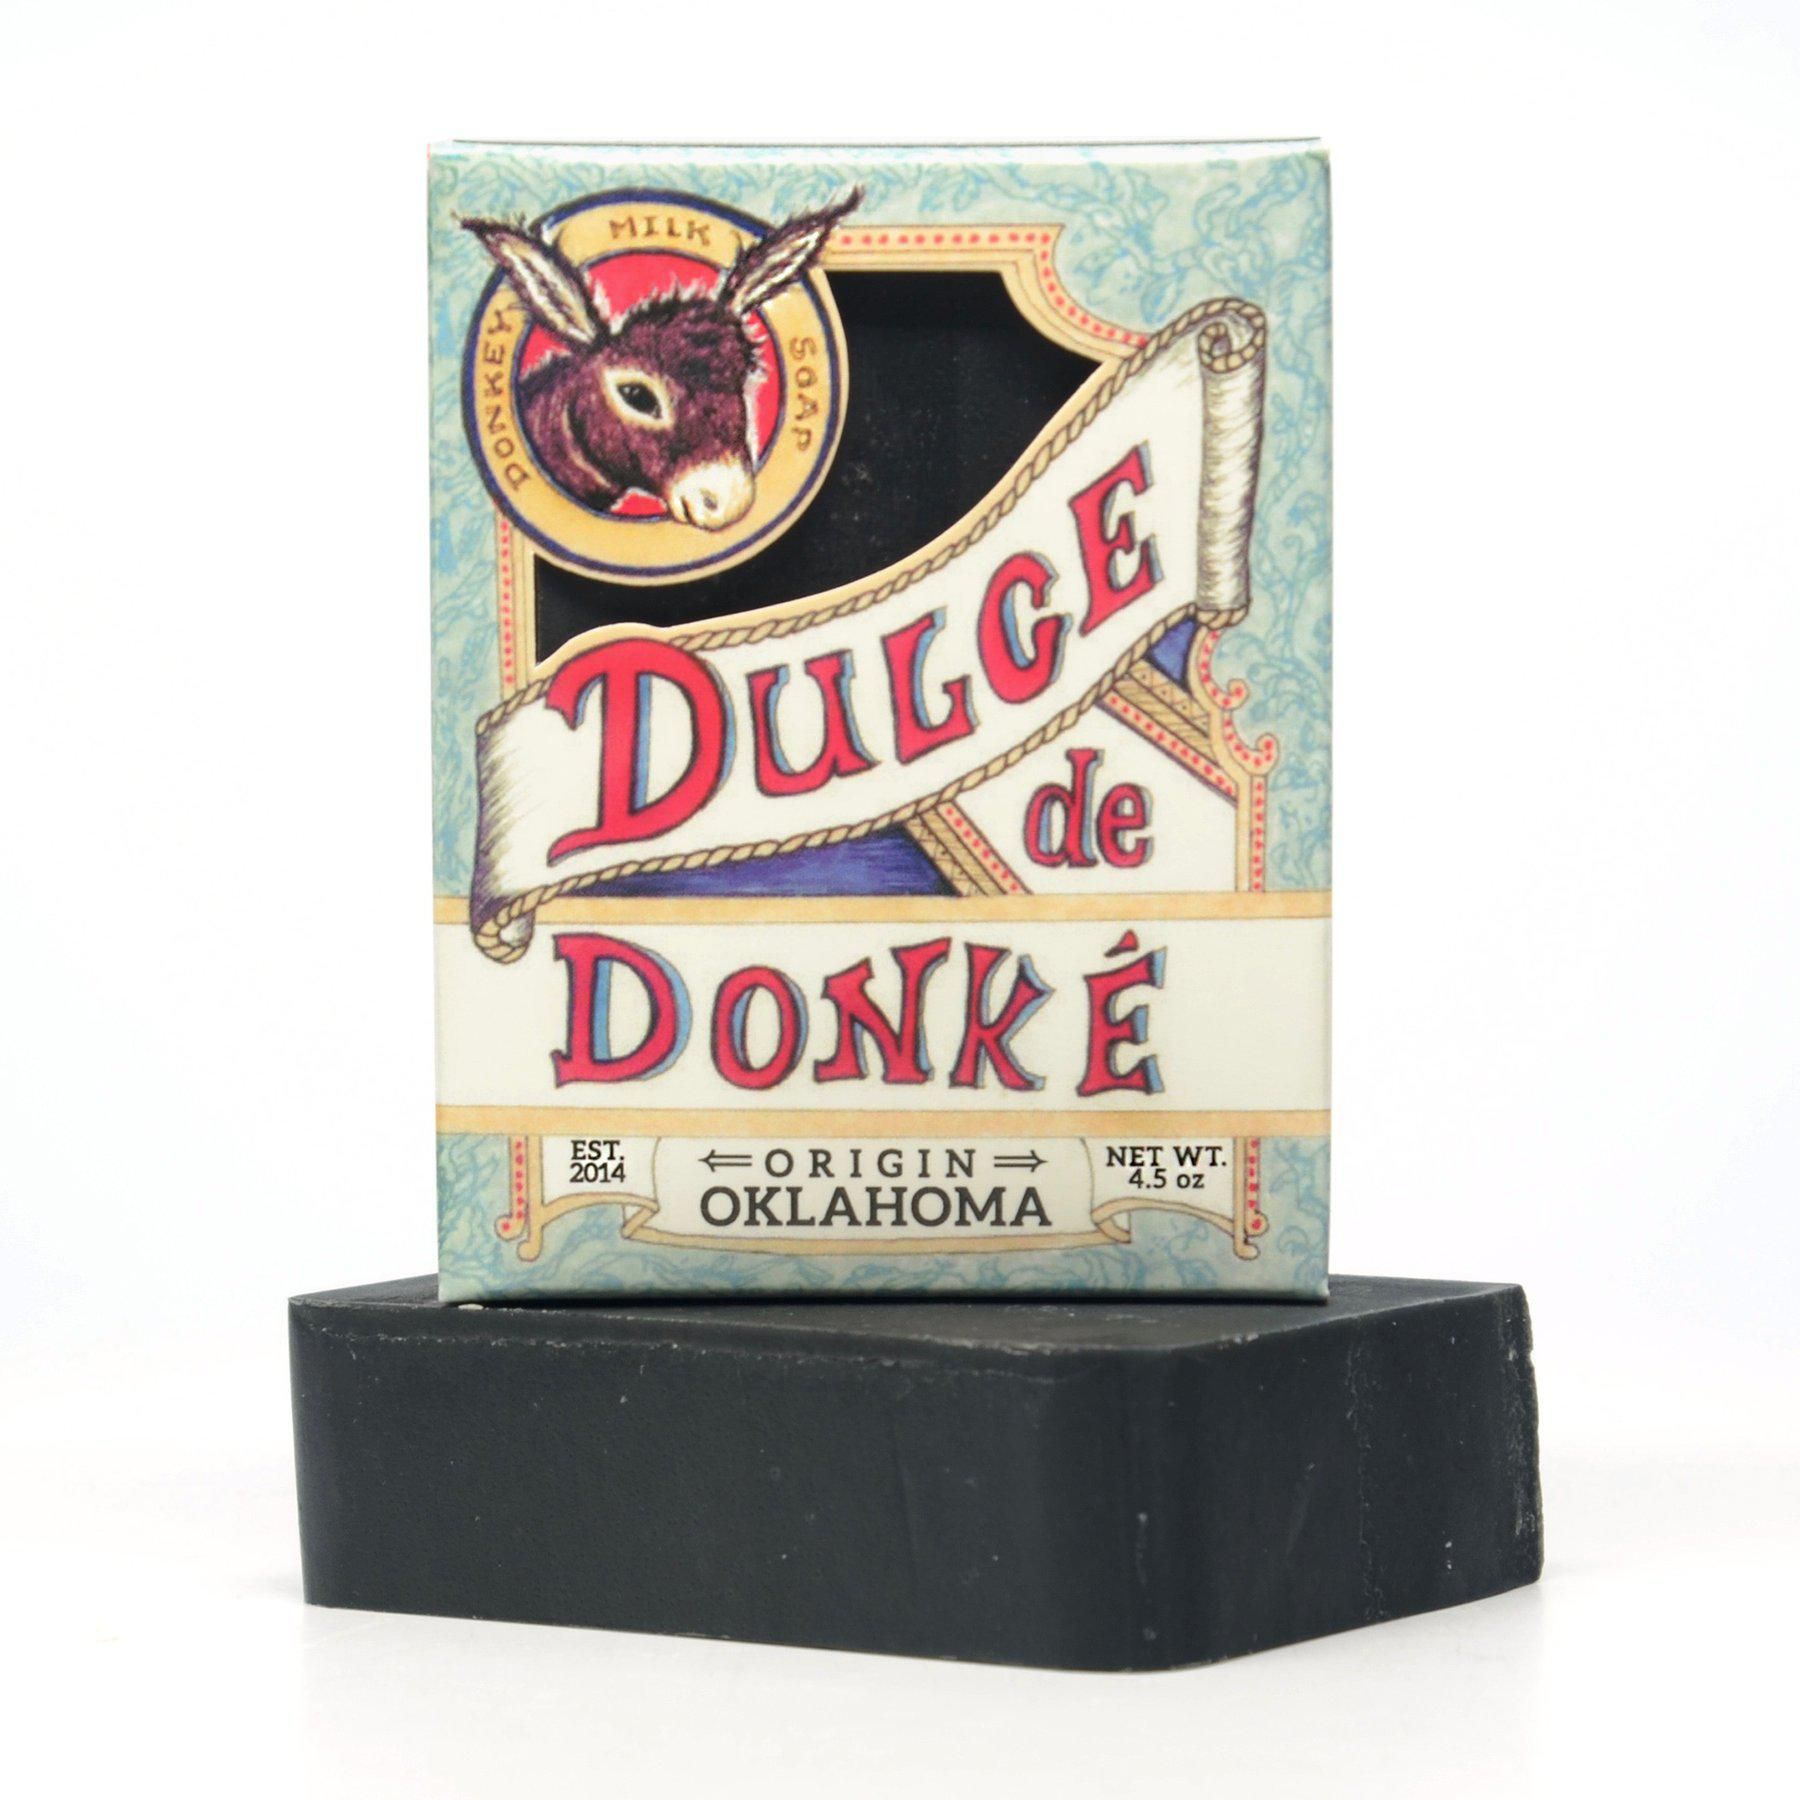 dulce de donke activated charcoal donkey milk soap